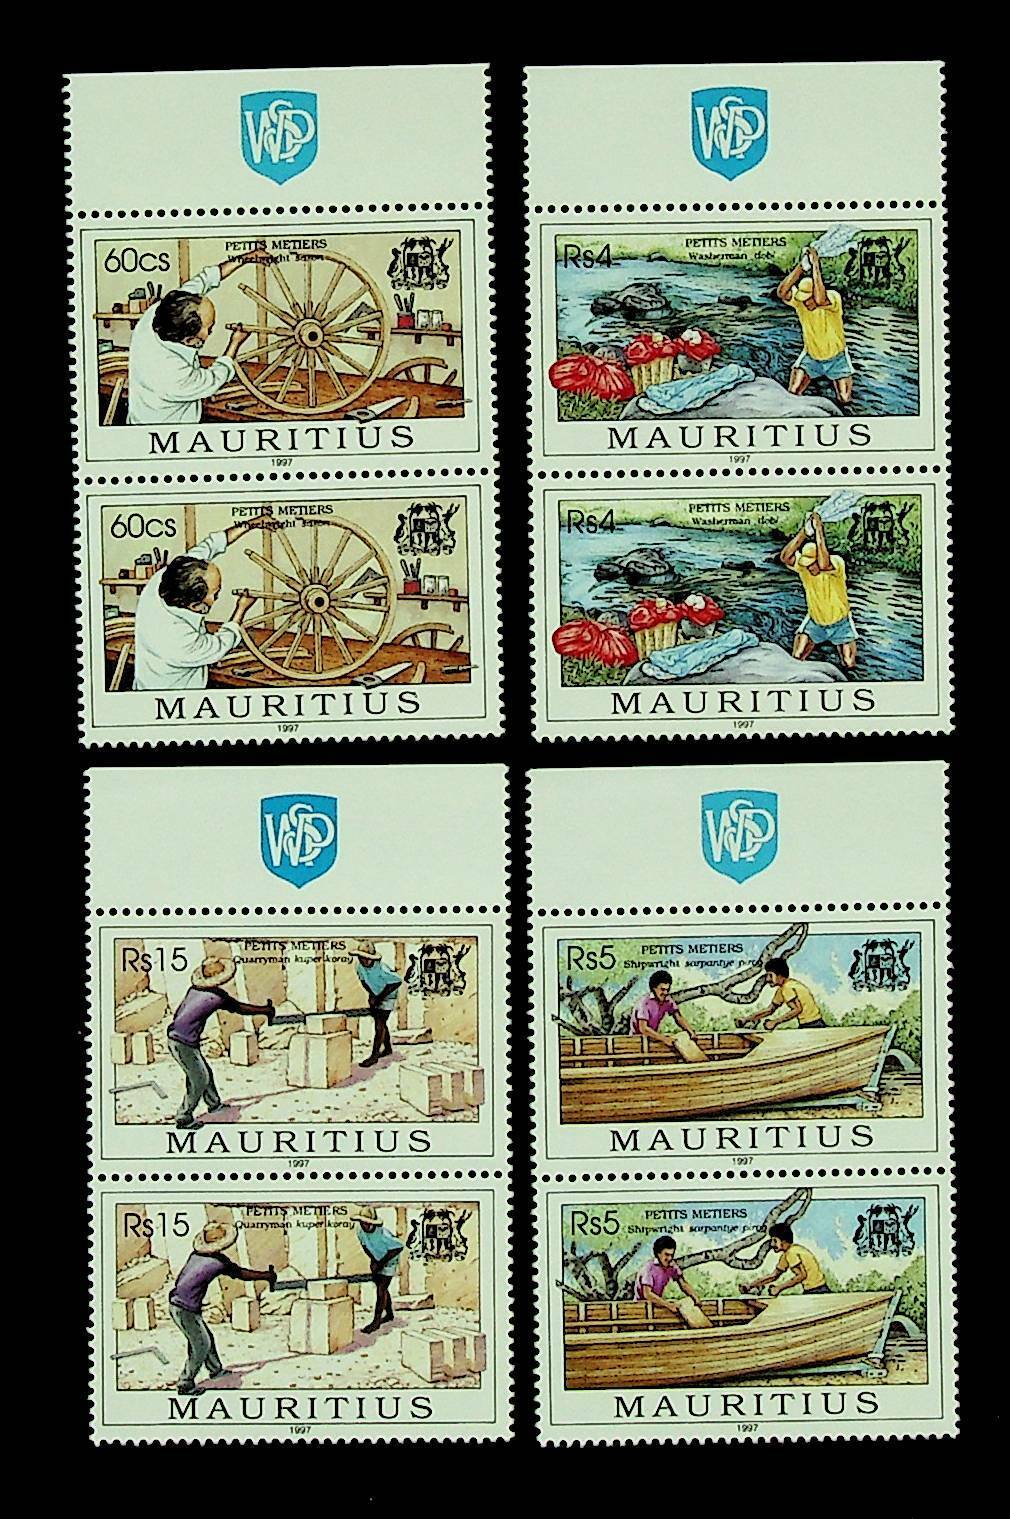 MAURITIUS 1997 SMALL LOCAL TRADES SET PAIR MNH STA OF Sales Fixed price for sale of SALE items from new works MARG. 4